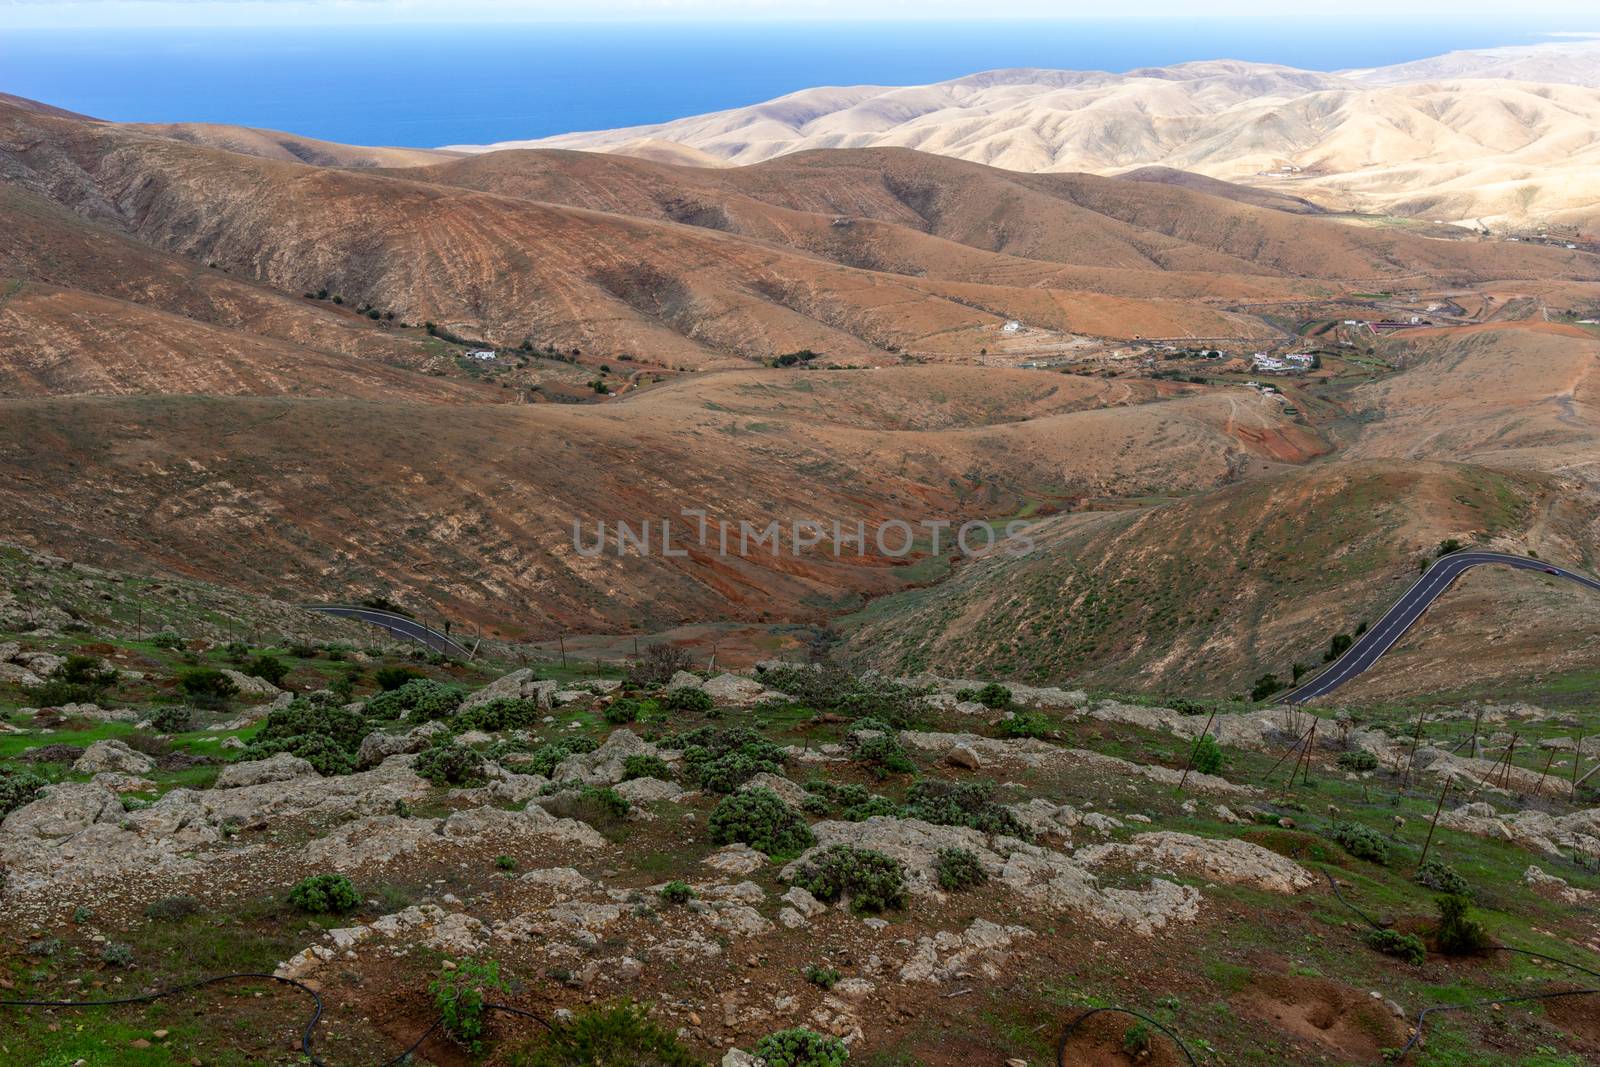 Panoramic view at landscape from viewpoint Mirador Morro Velosa on Fuerteventura, Spain with  green vegetation and multi colored volcanic hills